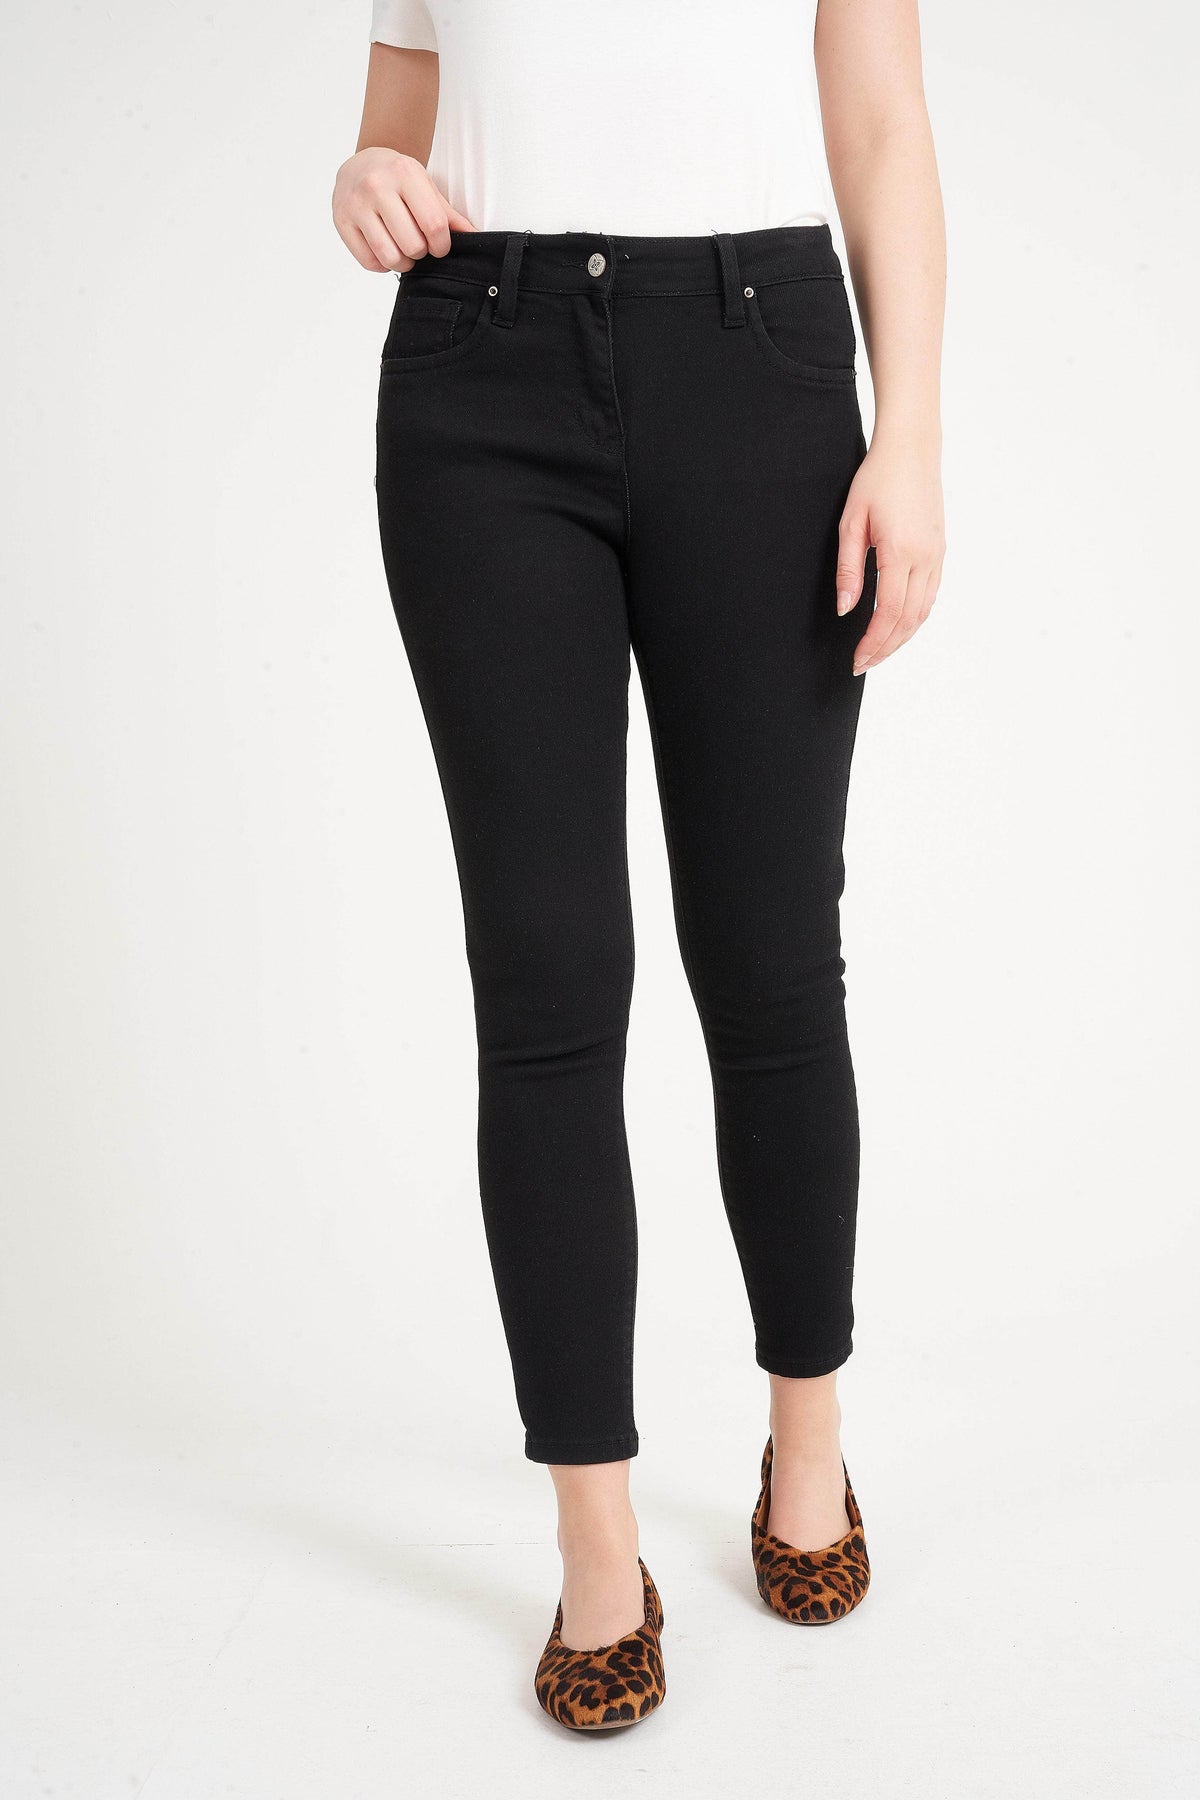 Saloos Trousers 7349-A